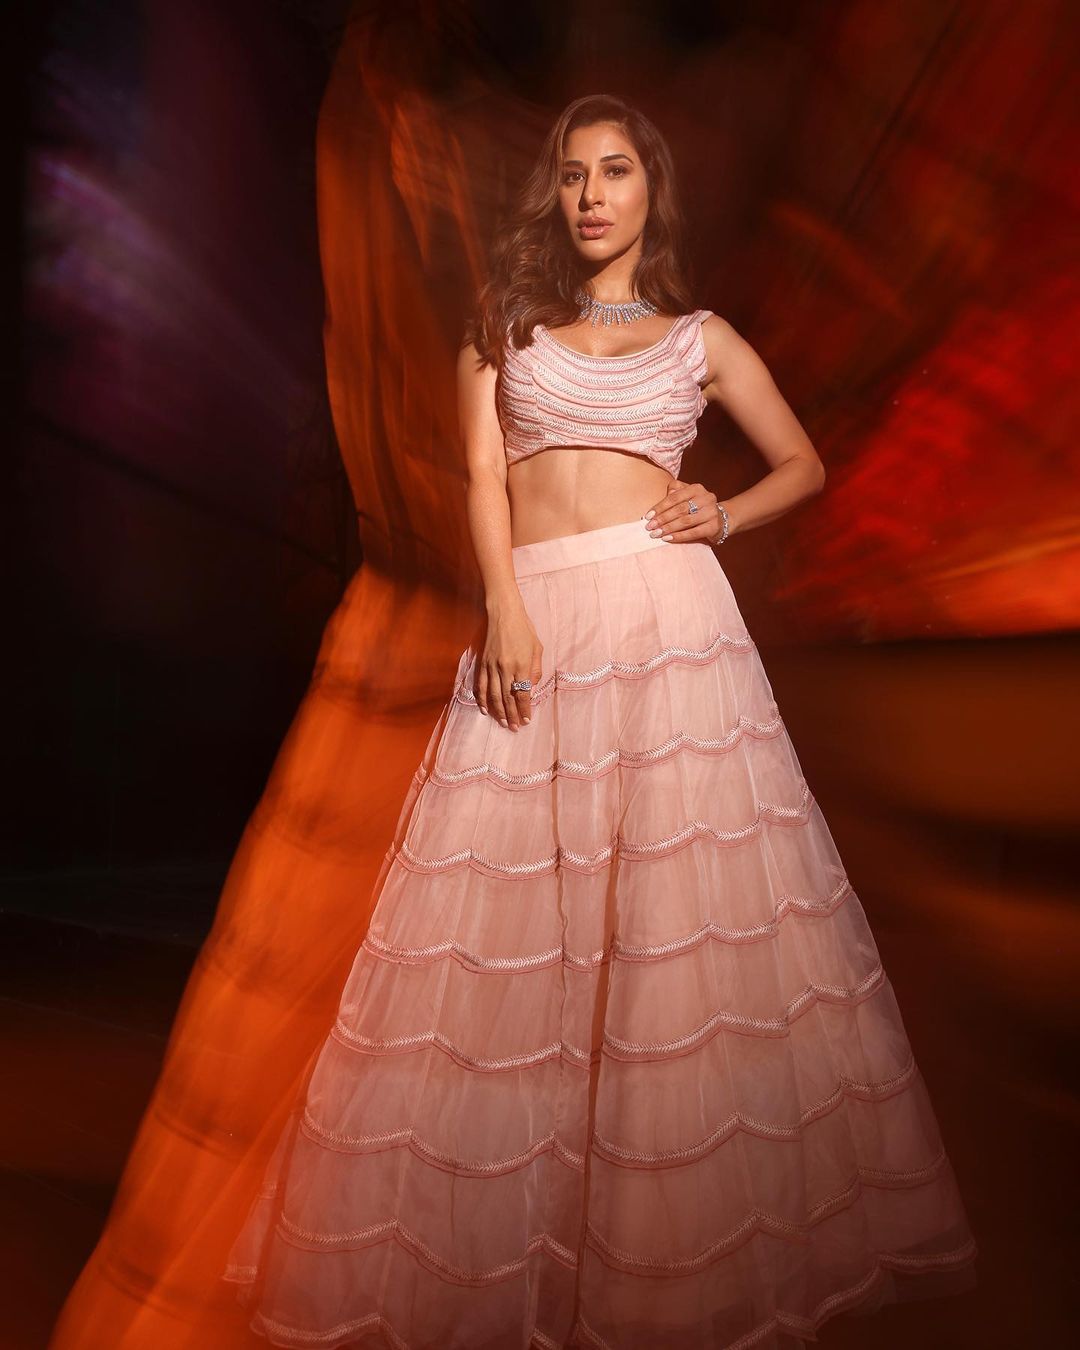 Sophie Choudry looks regal in the pastel pink striped lehenga and matching choli